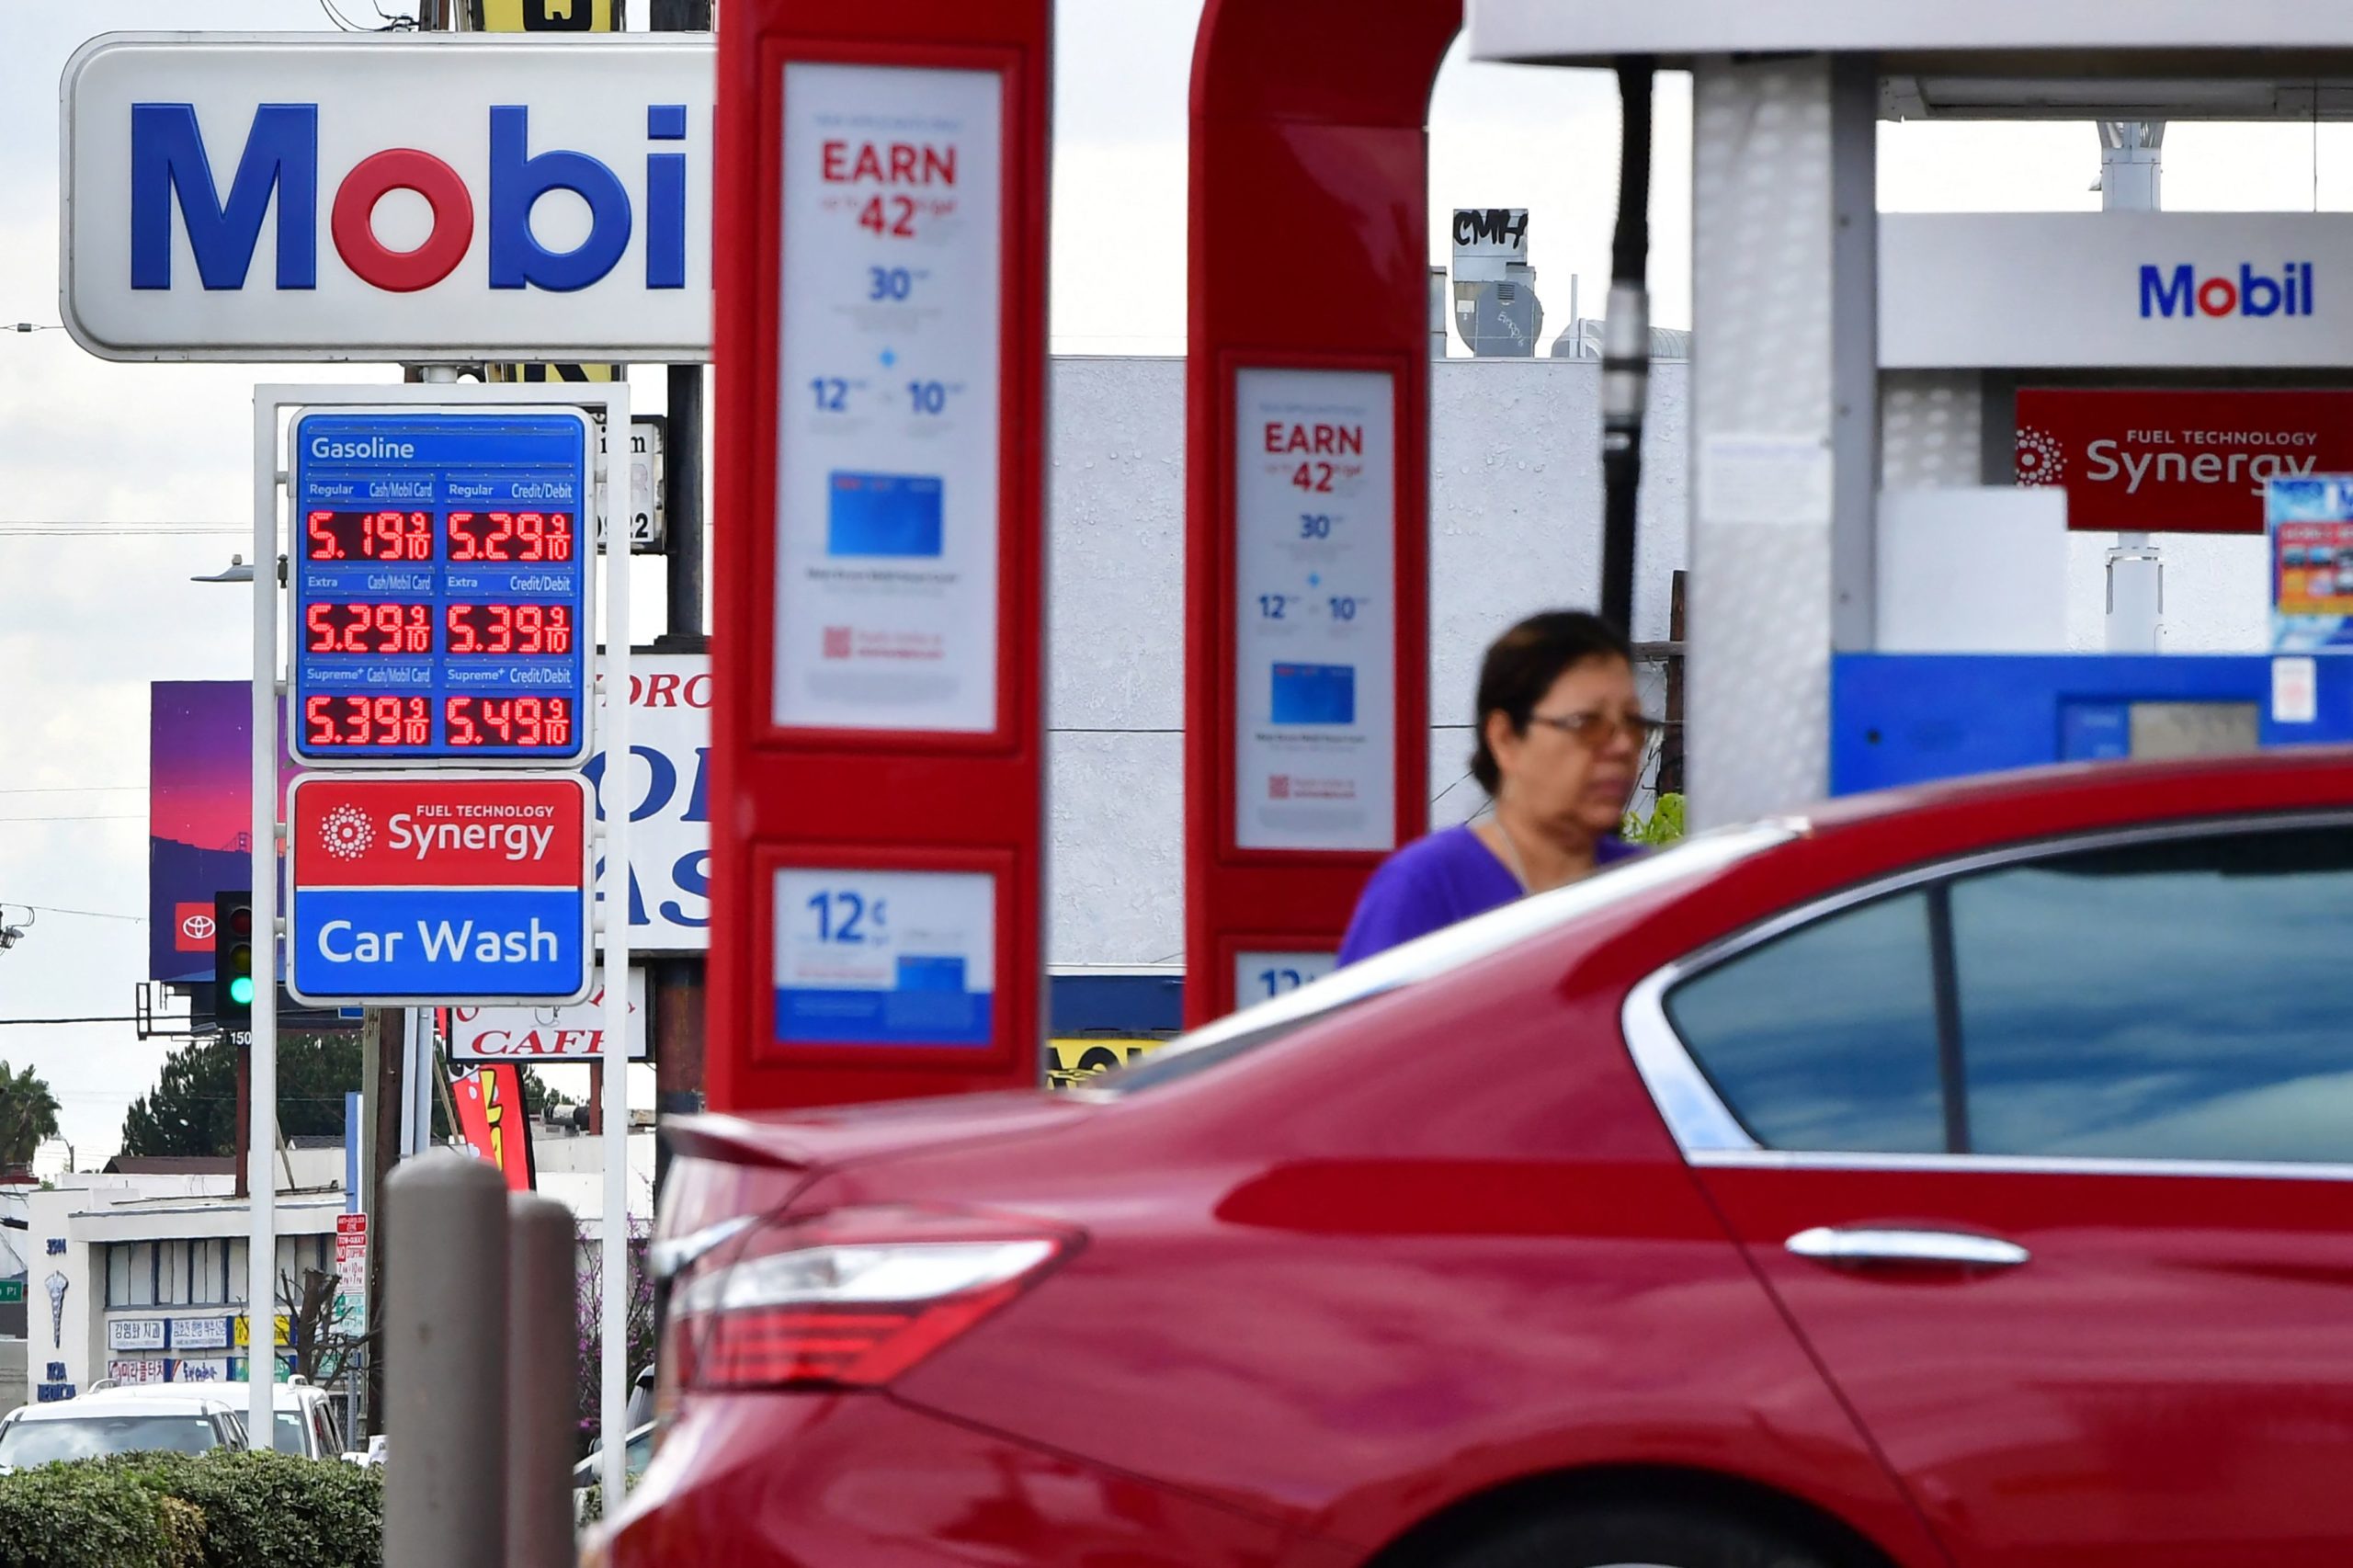 Gas prices over $5.00 a gallon are posted at a petrol station in Los Angeles, California on March 4. (Frederic J. Brown/AFP via Getty Images)